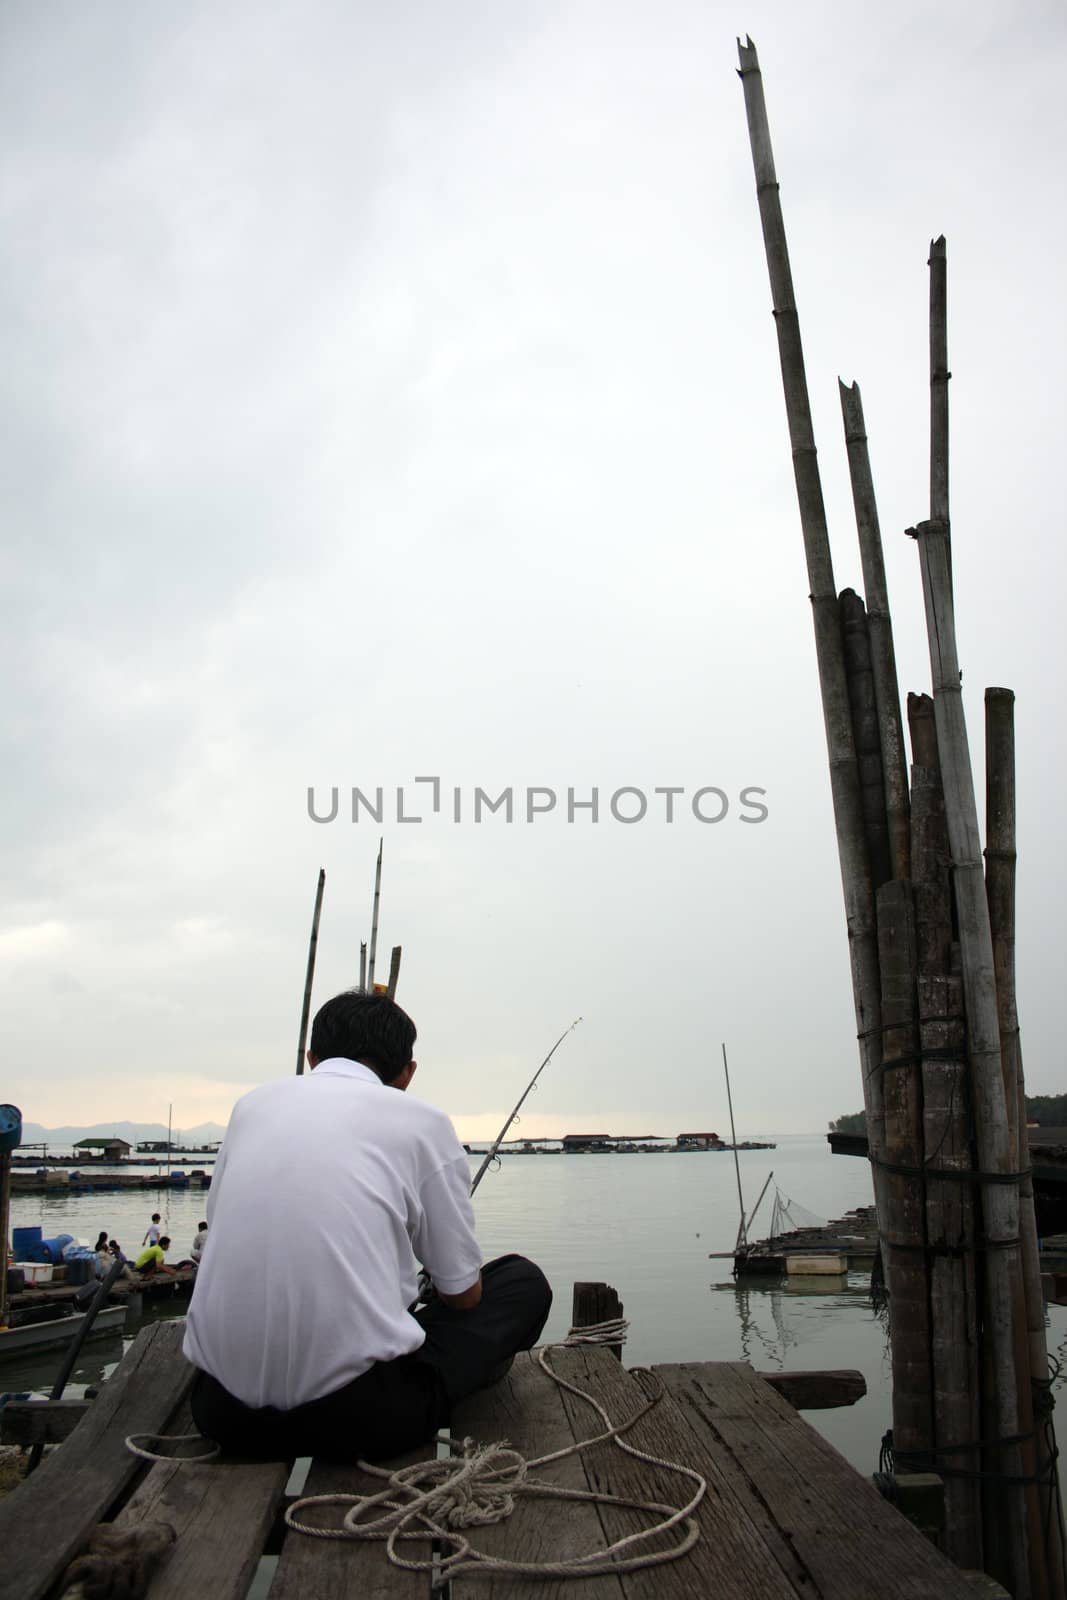 A city man fishing in a fishing village.